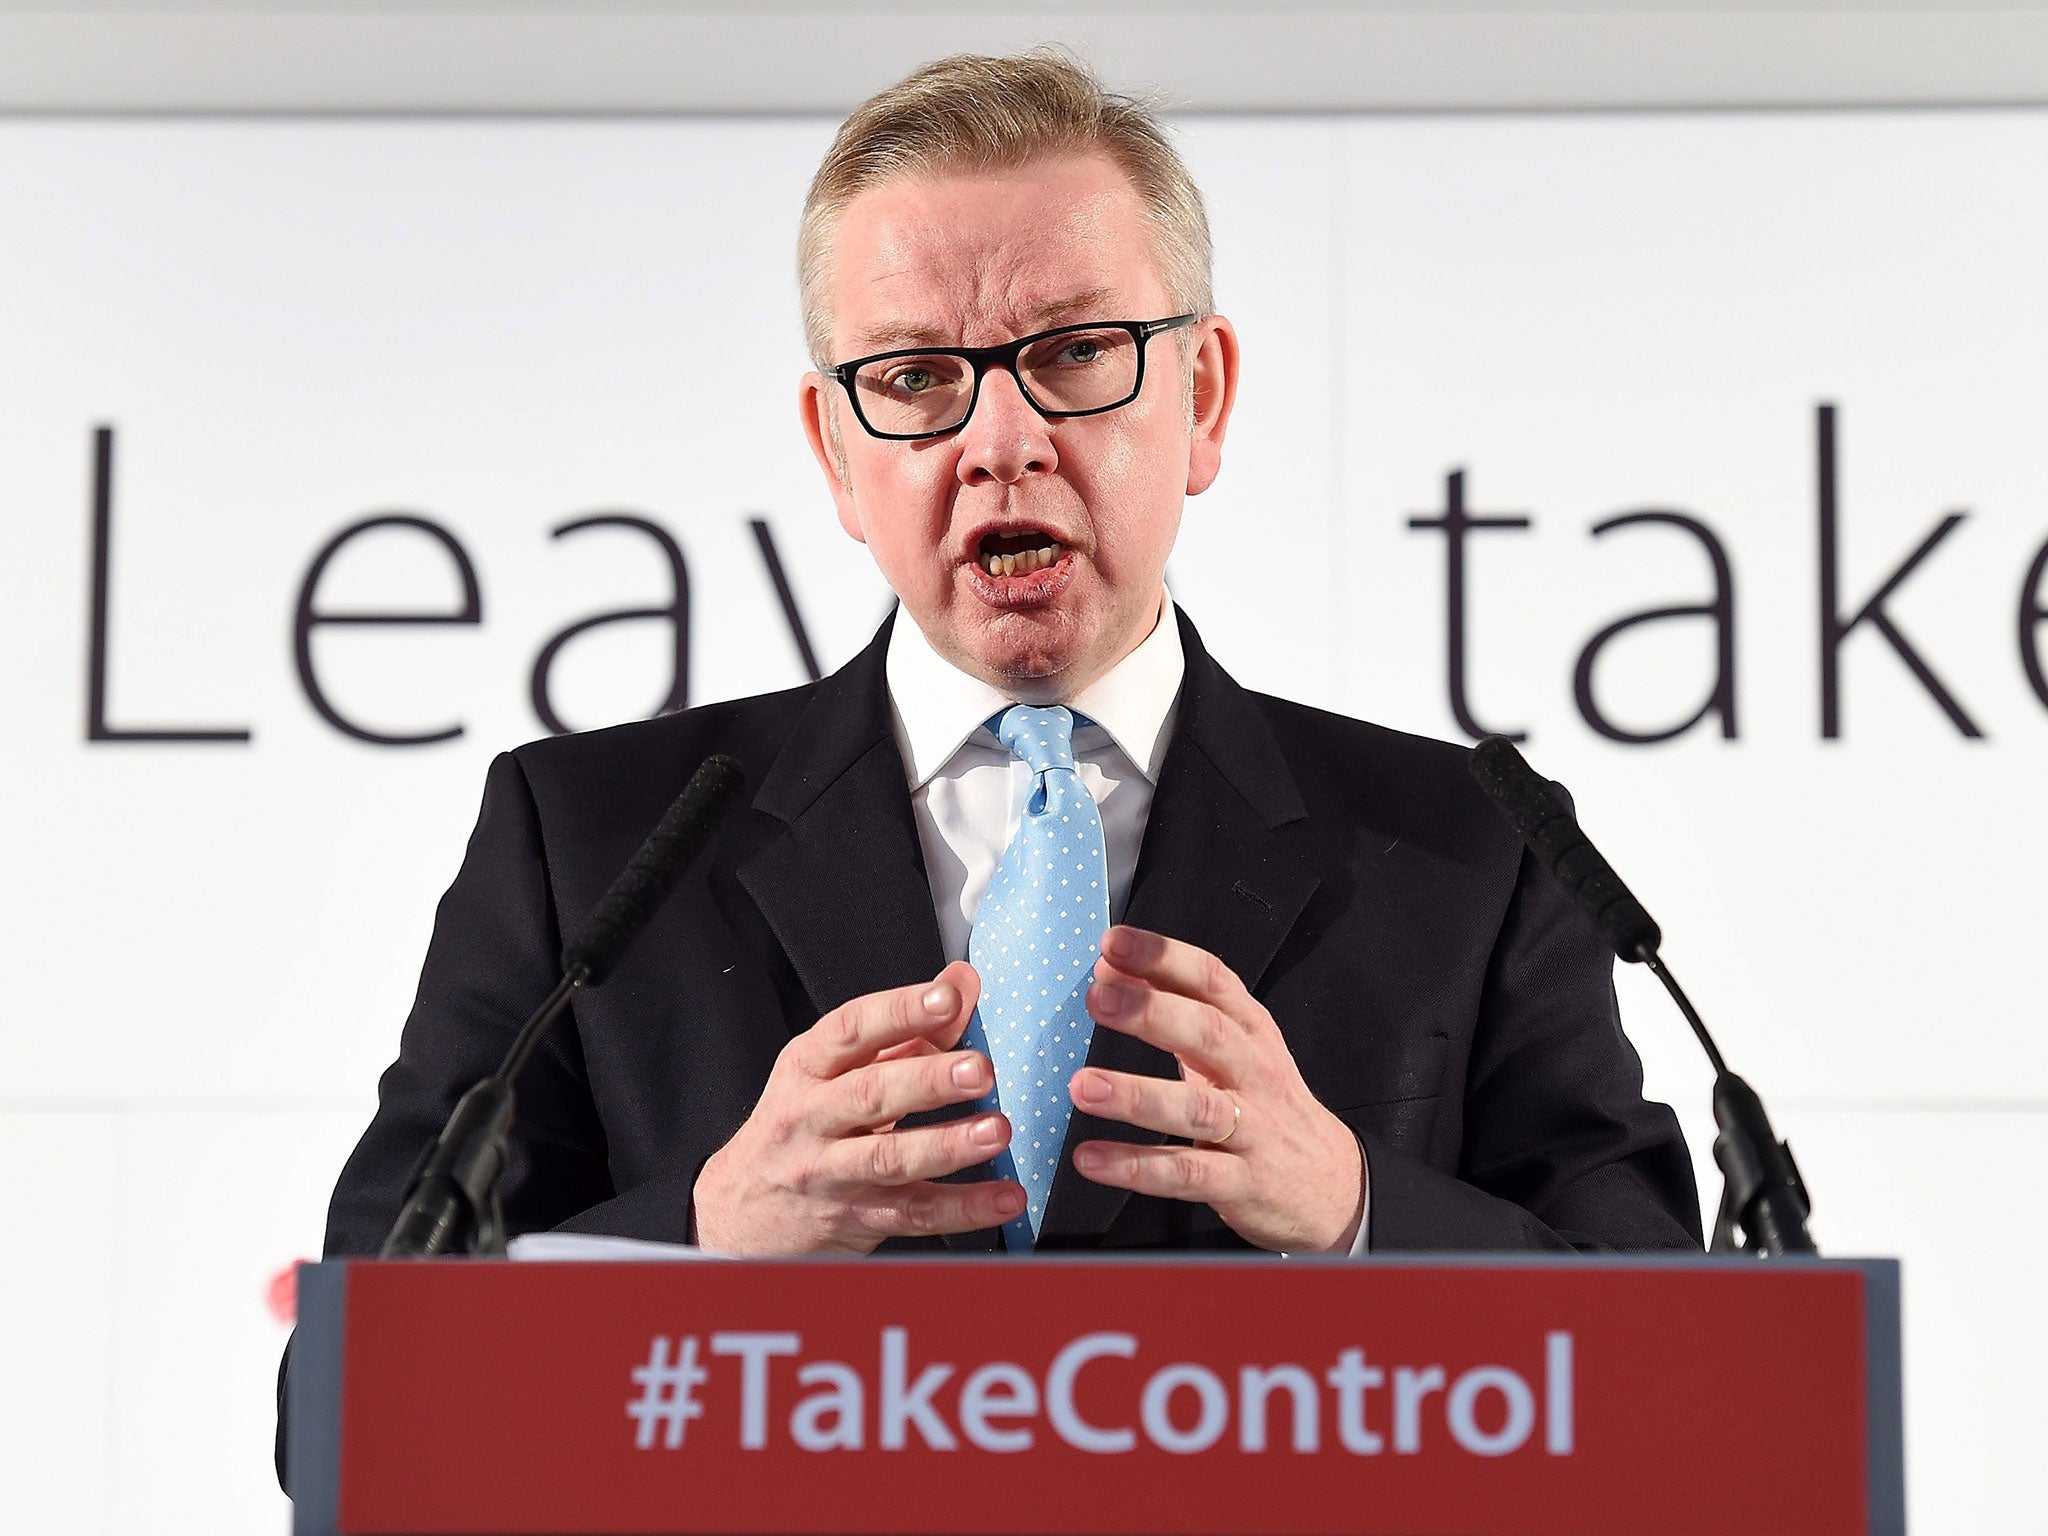 Michael Gove delivers a speech on the EU in London, Britain, 19 April 2016